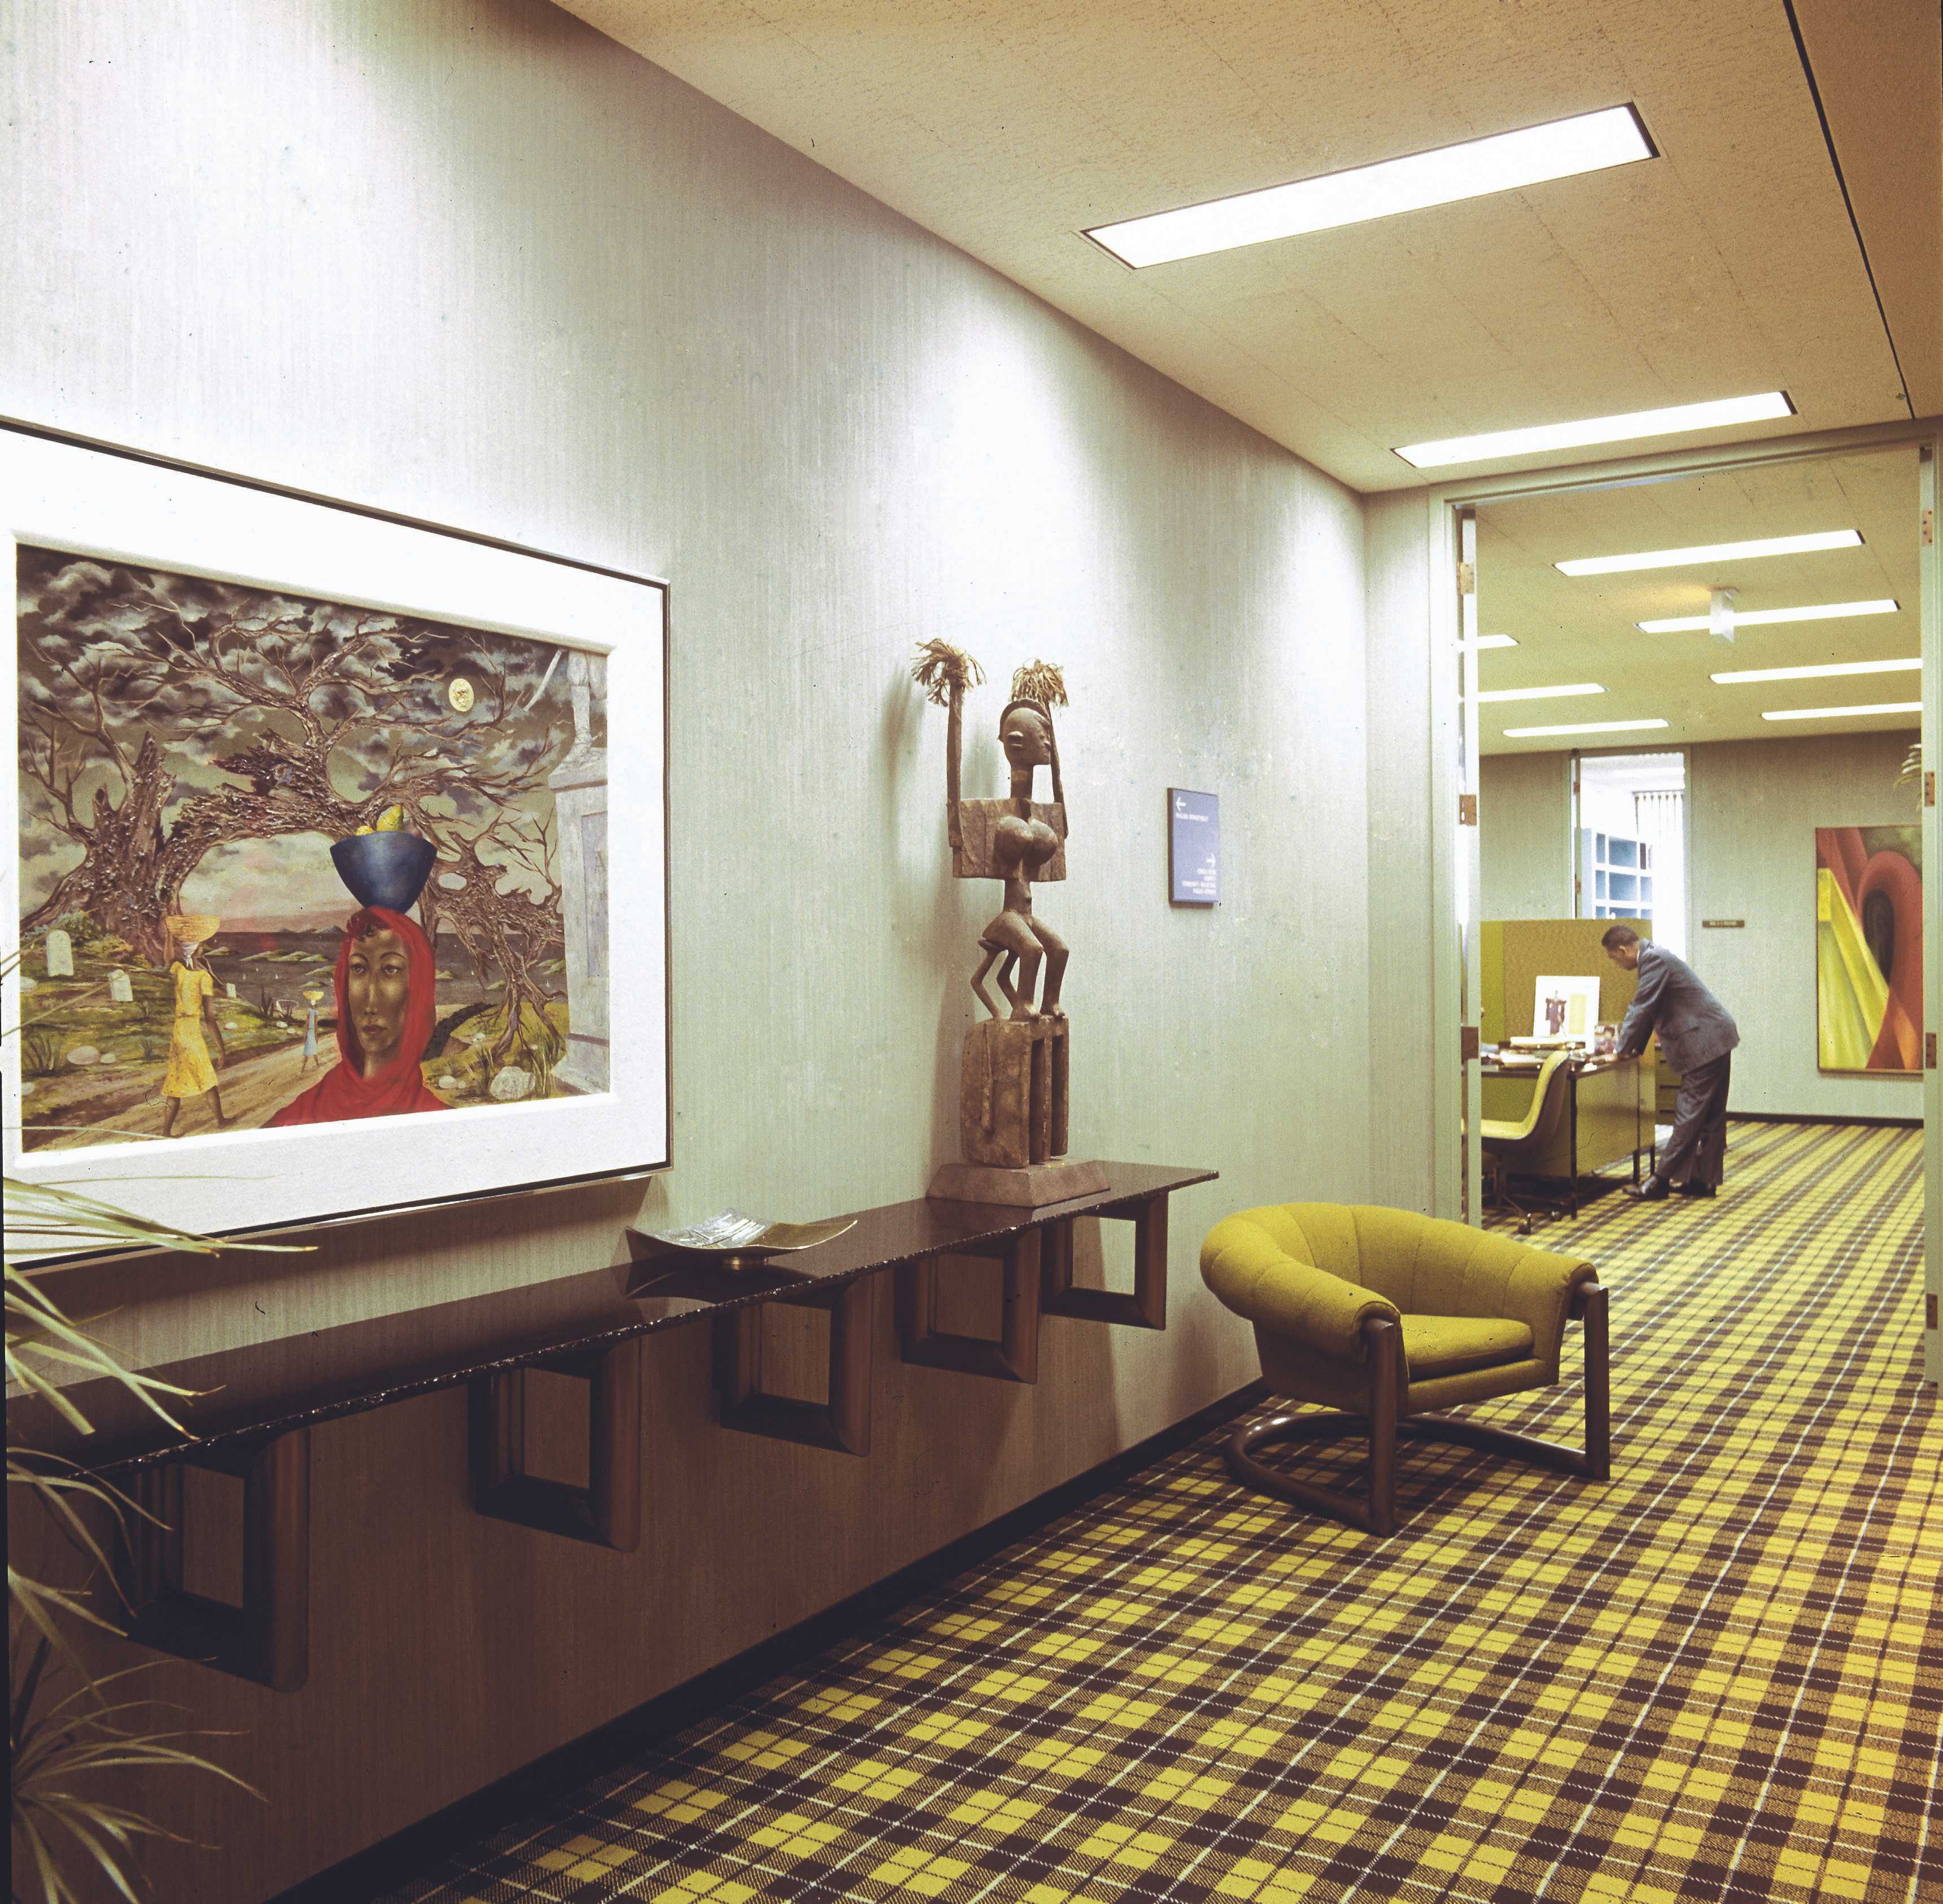 A photos of a 70s office with yellow and black patterned carpet and African art on the walls.